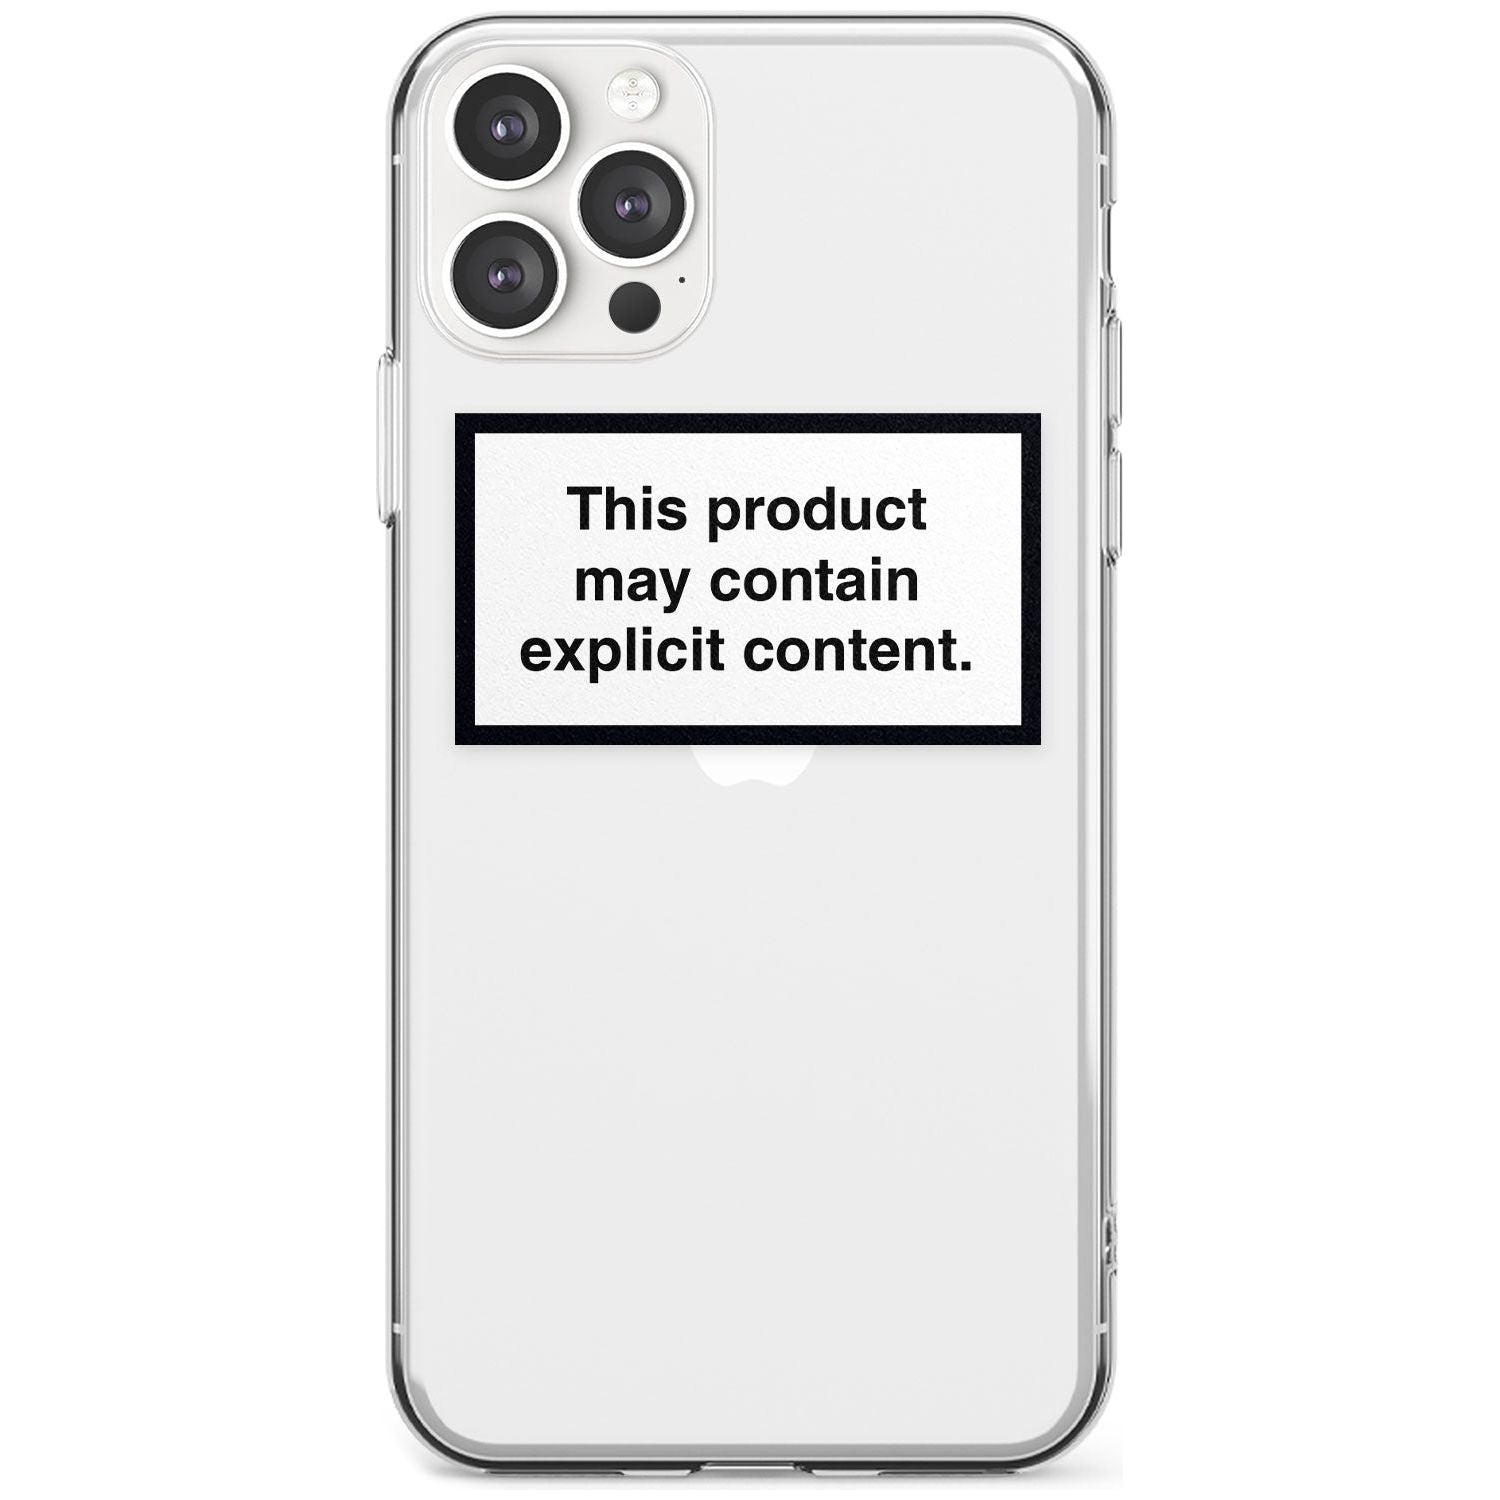 This product may contain explicit content Black Impact Phone Case for iPhone 11 Pro Max